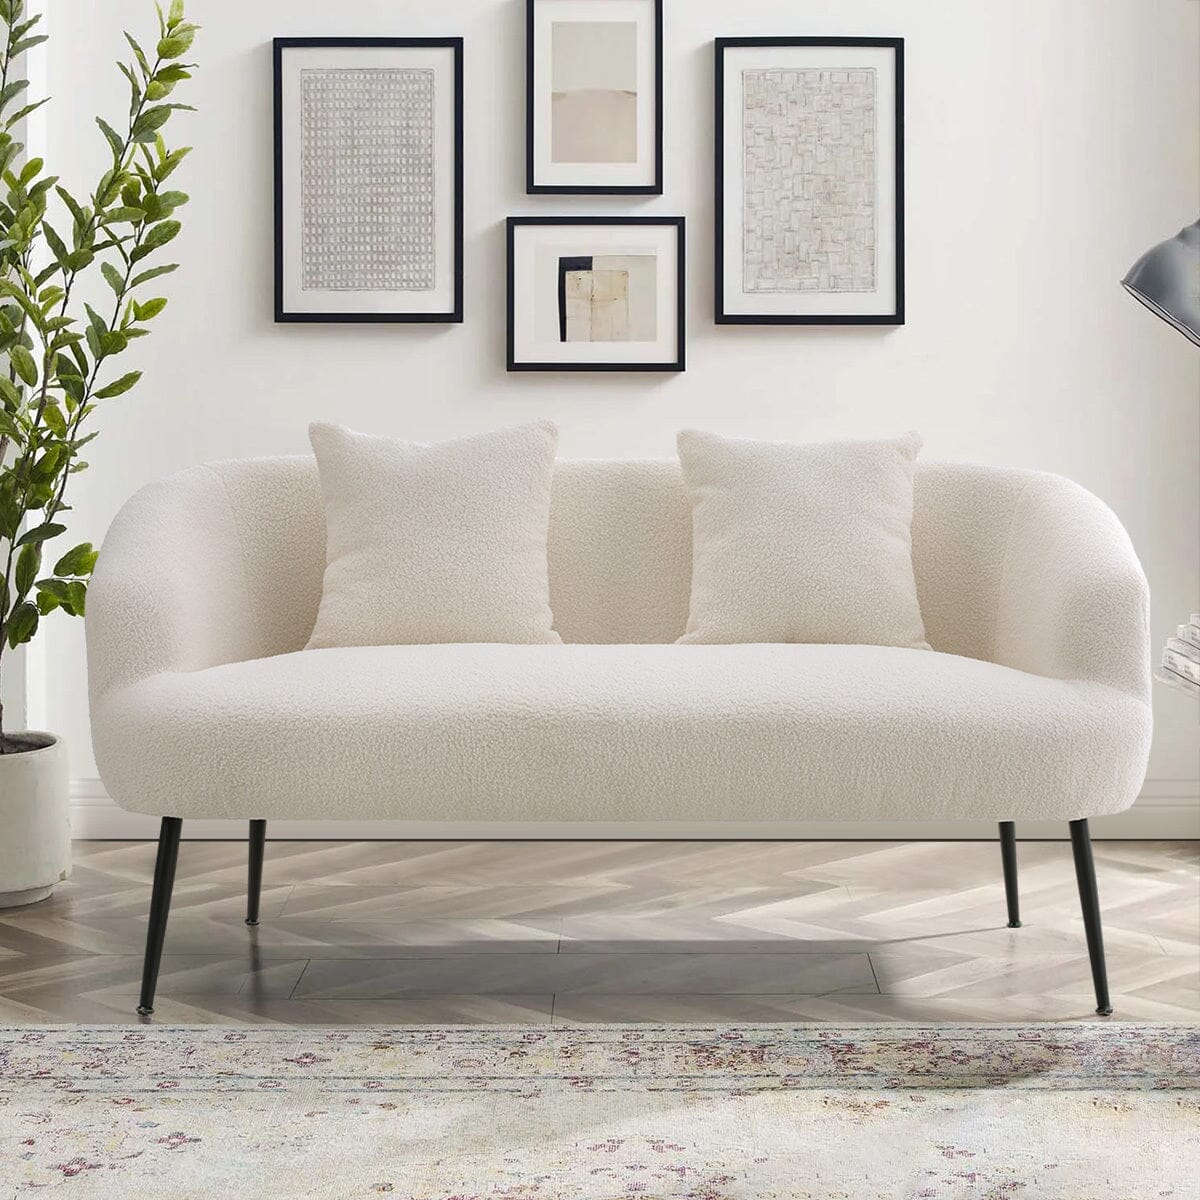 140cm White 2 Seater Sofa Teddy Fabric Loveseat with Metal Legs 2 Seater Sofas Living and Home 